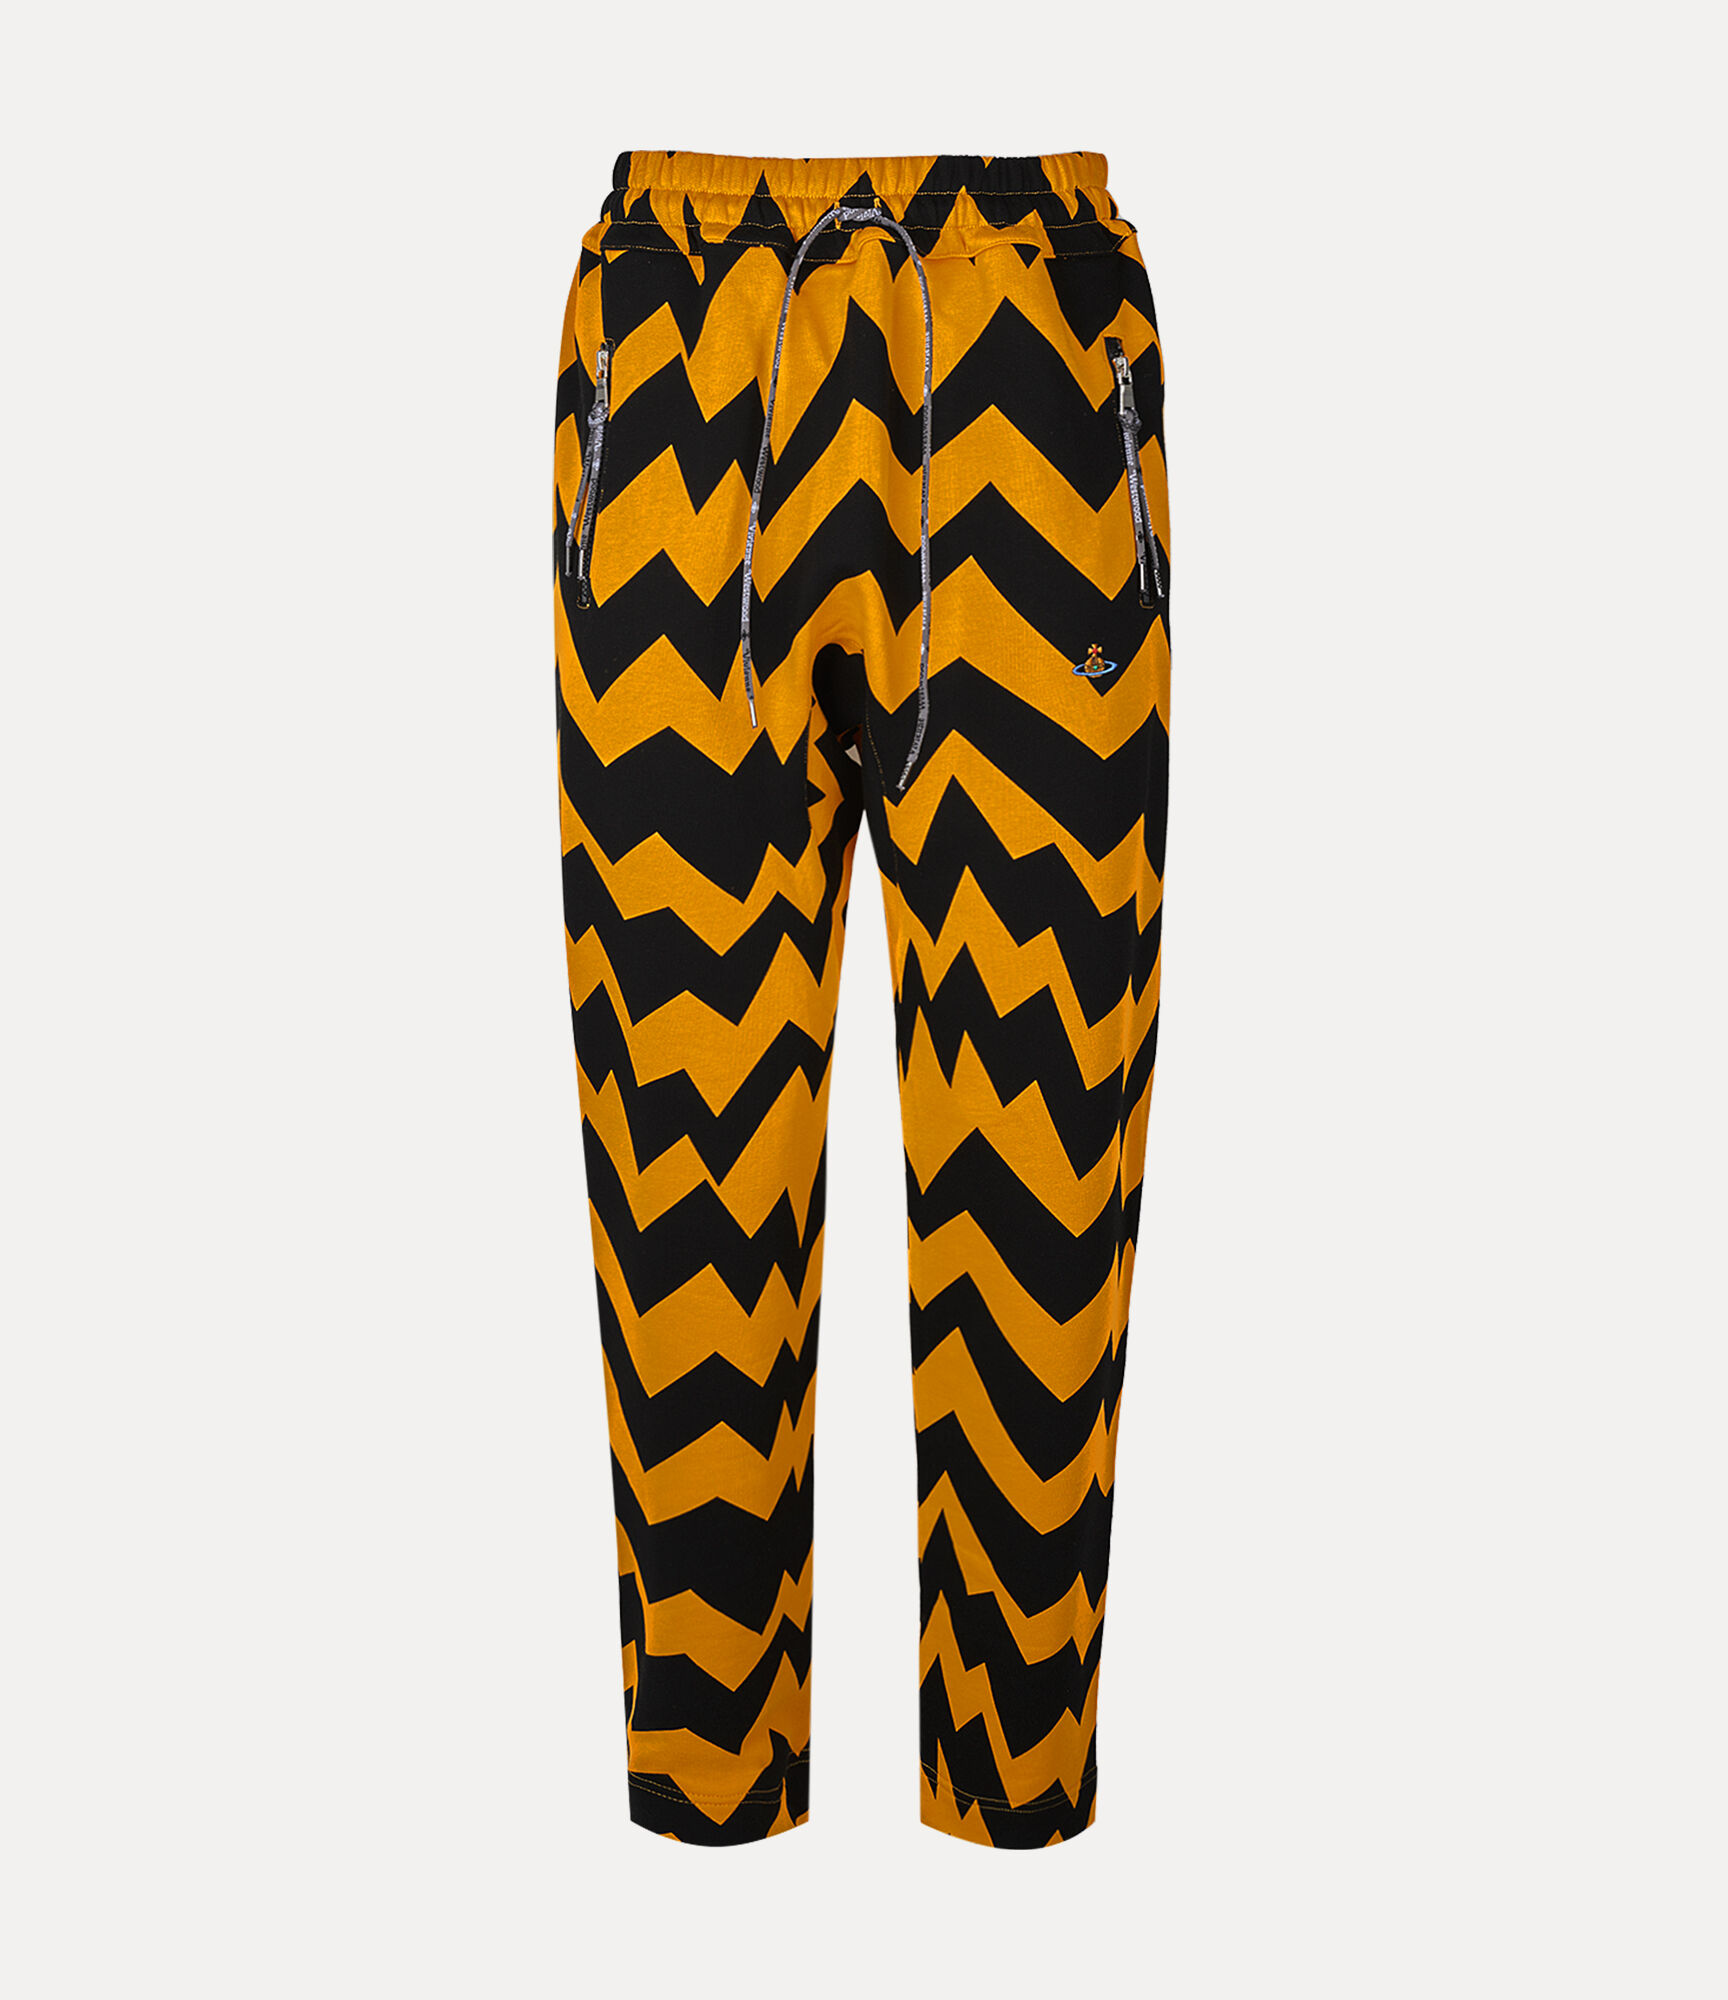 Football trousers